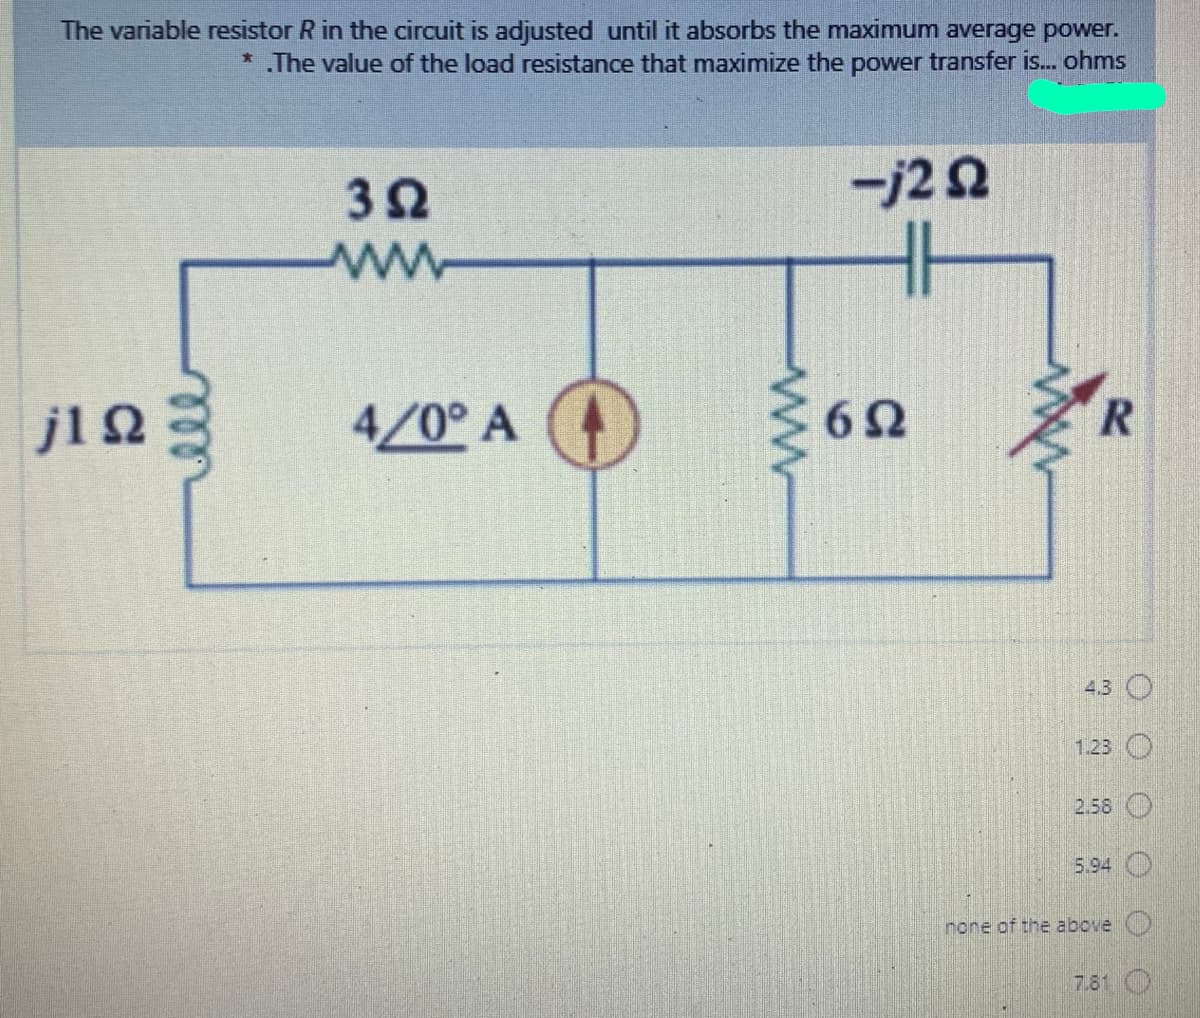 The variable resistor R in the circuit is adjusted until it absorbs the maximum average power.
* The value of the load resistance that maximize the power transfer is... ohms
32
-j22
H
j12
4/0° A
R.
4.3 O
1.23 O
2.58 O
5.94
none of the above O
7.81 O
